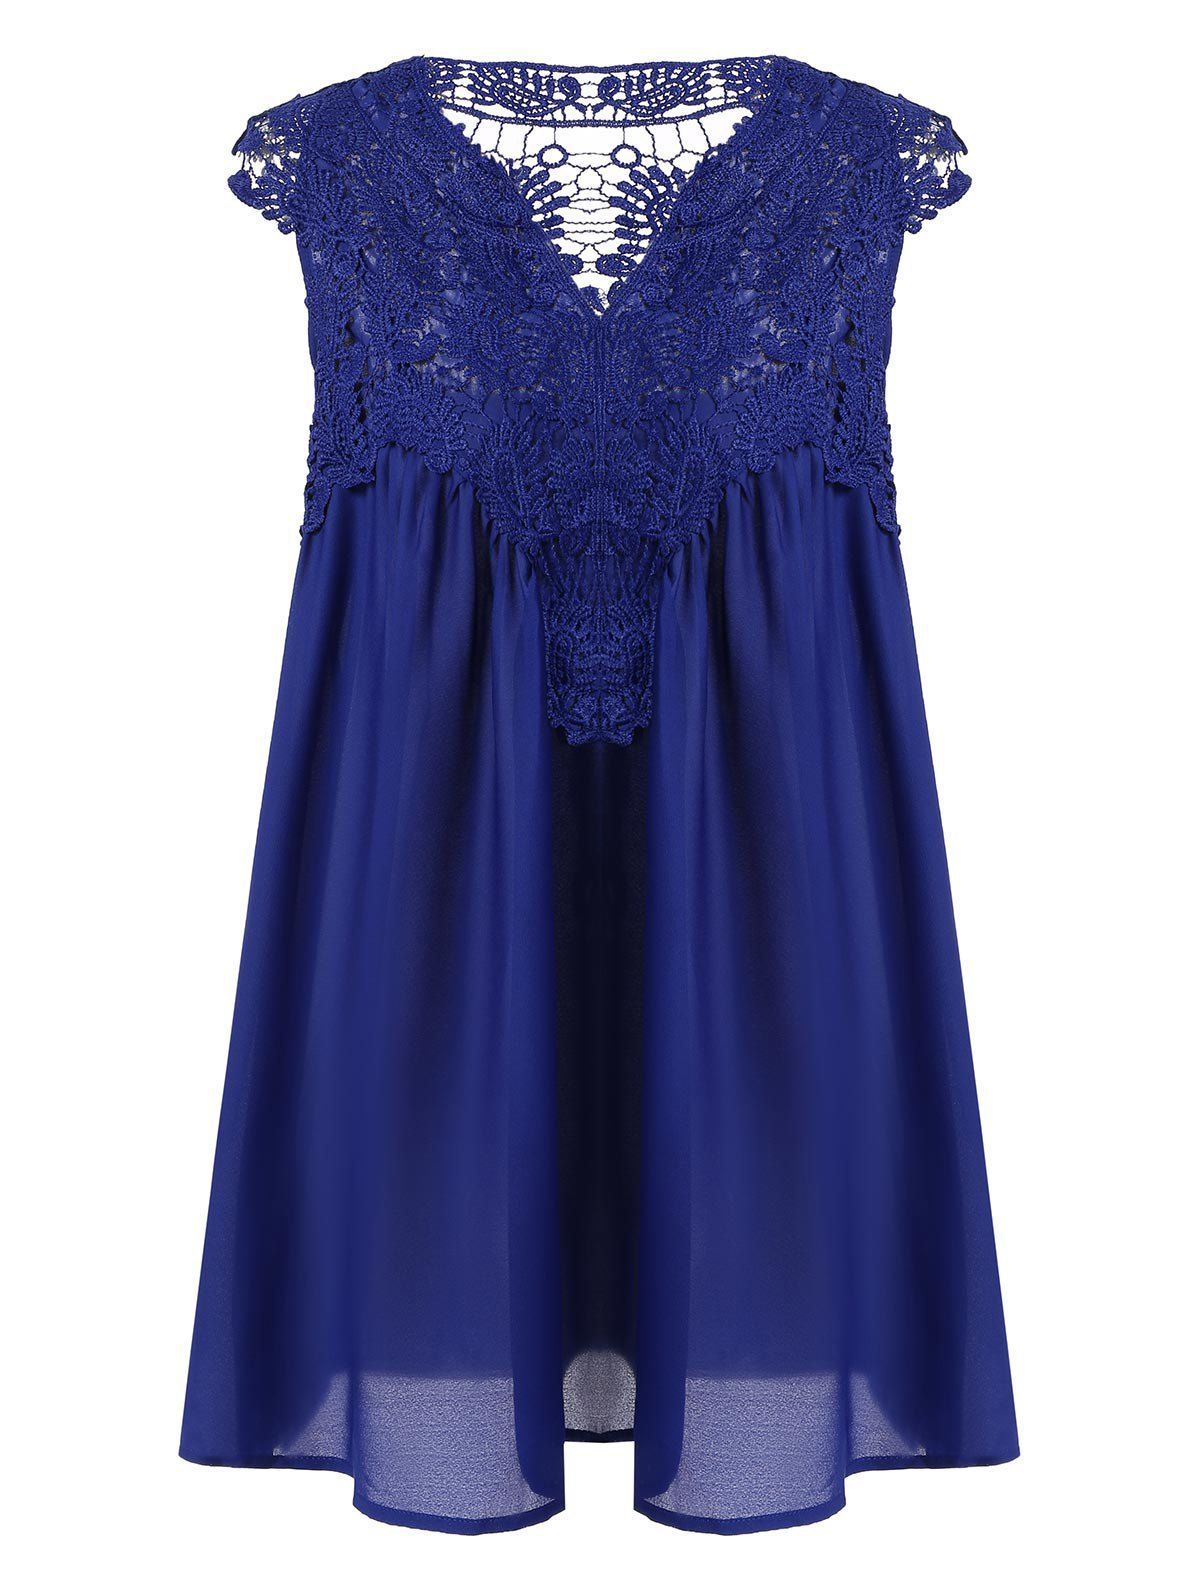 2018 Sleeveless Lace Splicing Draped Blouse In Sapphire Blue 3xl ...